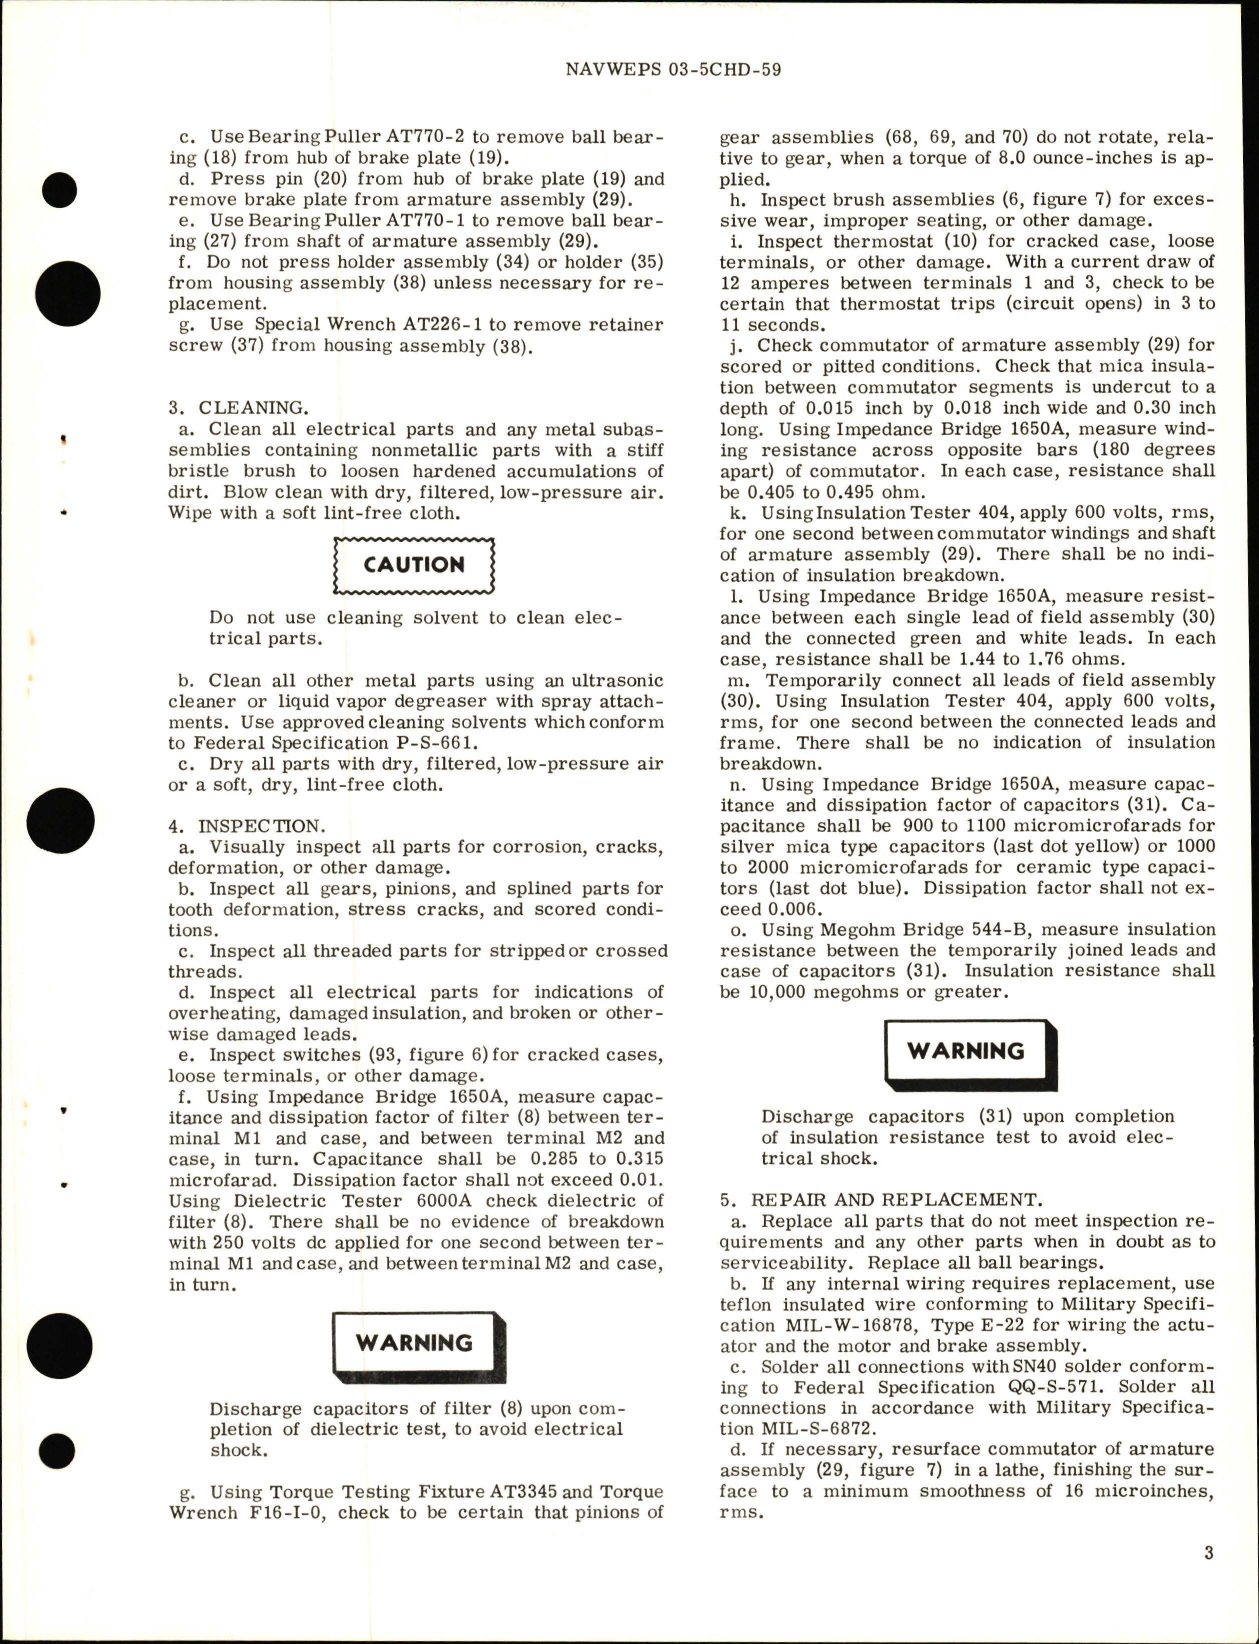 Sample page 5 from AirCorps Library document: Overhaul Instructions with Parts Breakdown for Electro-Mechanical Linear Actuator Model L16-8-1 and R1680-720-5810-XABN